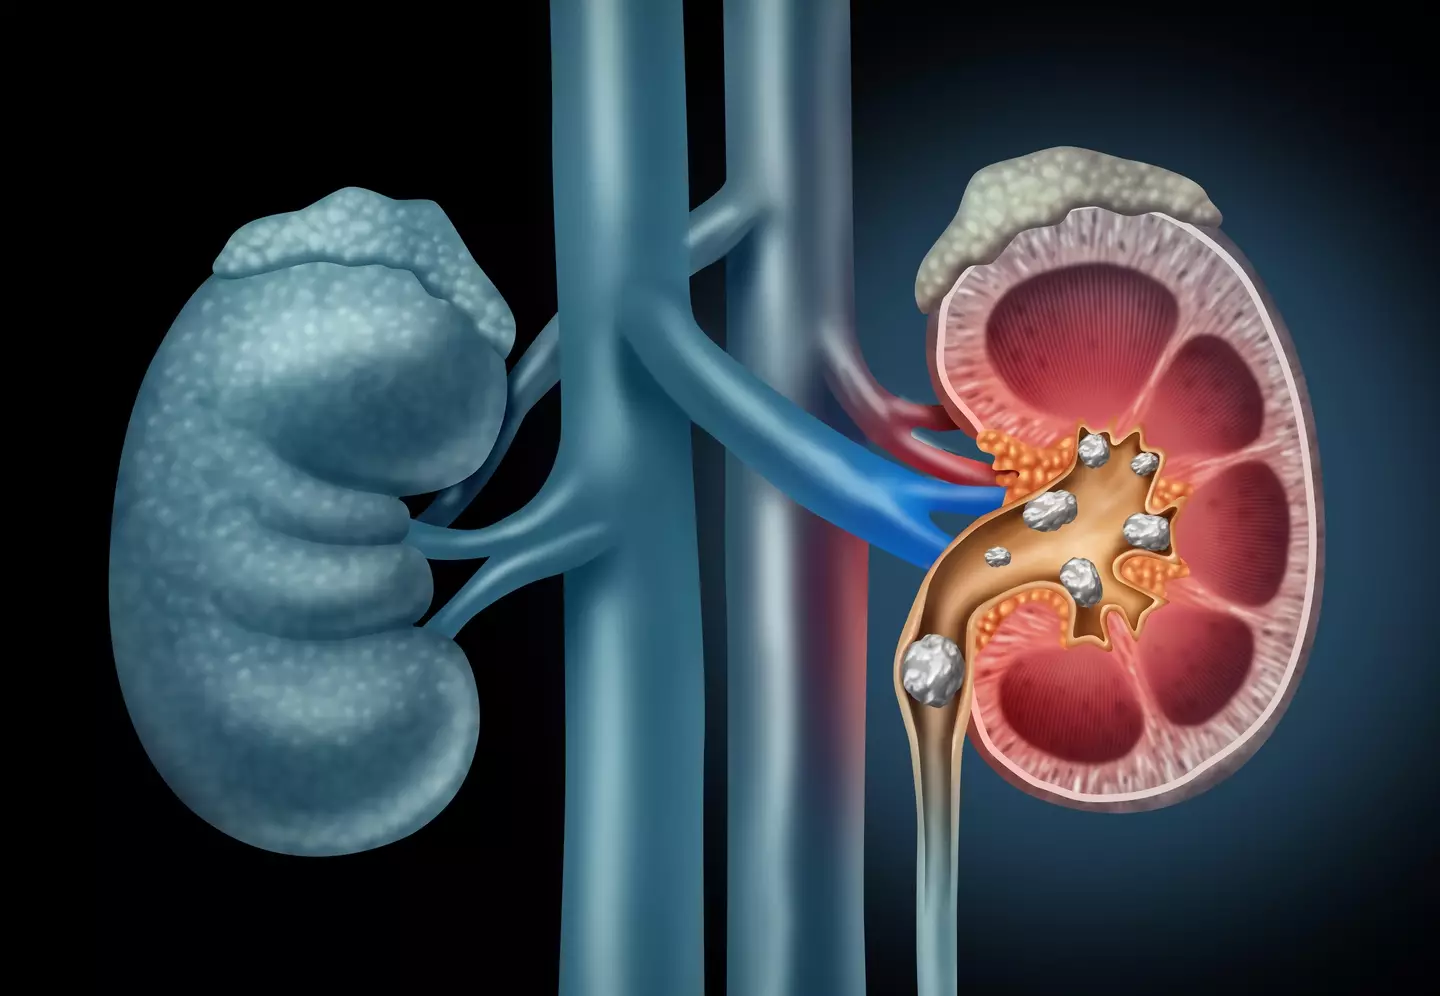 1 in 10 people in the UK are affected by kidney stones.